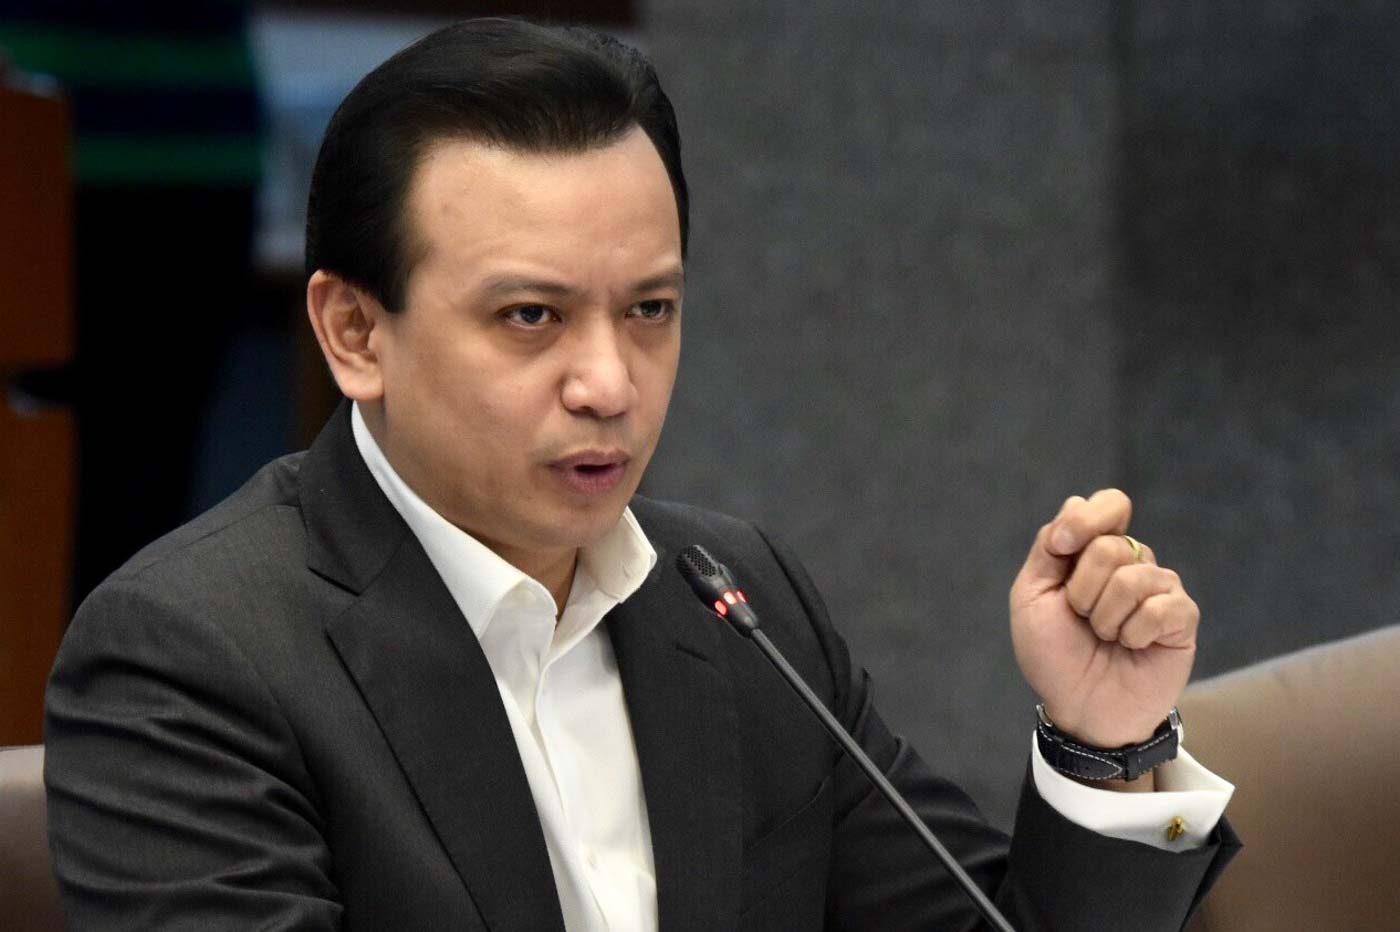 Trillanes denies links to Bikoy: ‘He failed our vetting process’